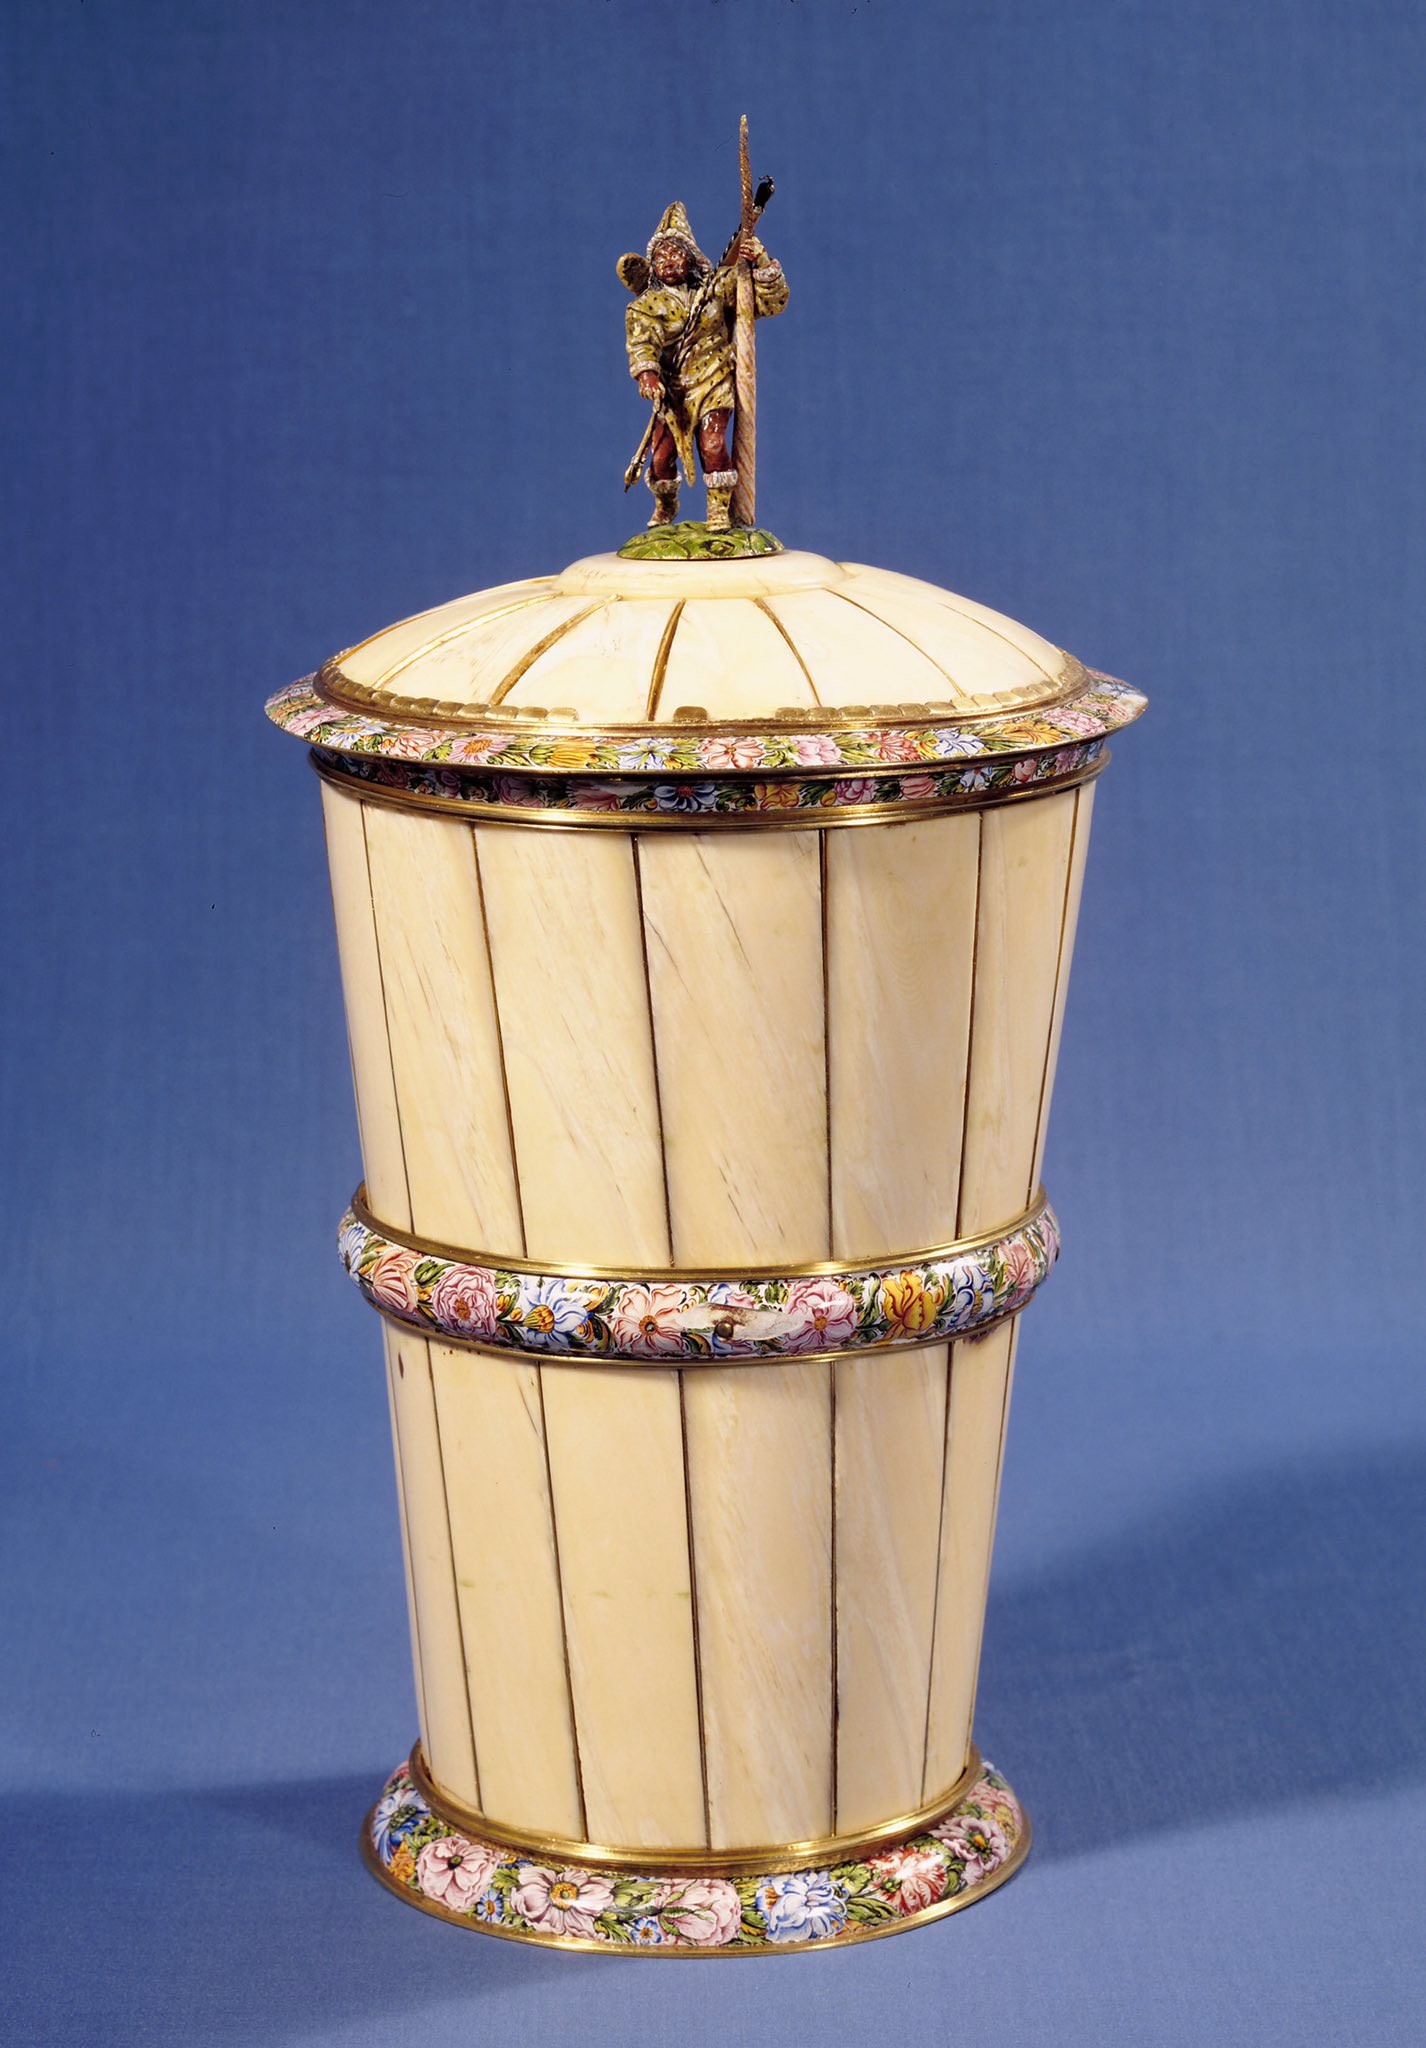 Narwhal tusks were made into items like this cup from The Royal Danish Collection to protect users from being poisoned.